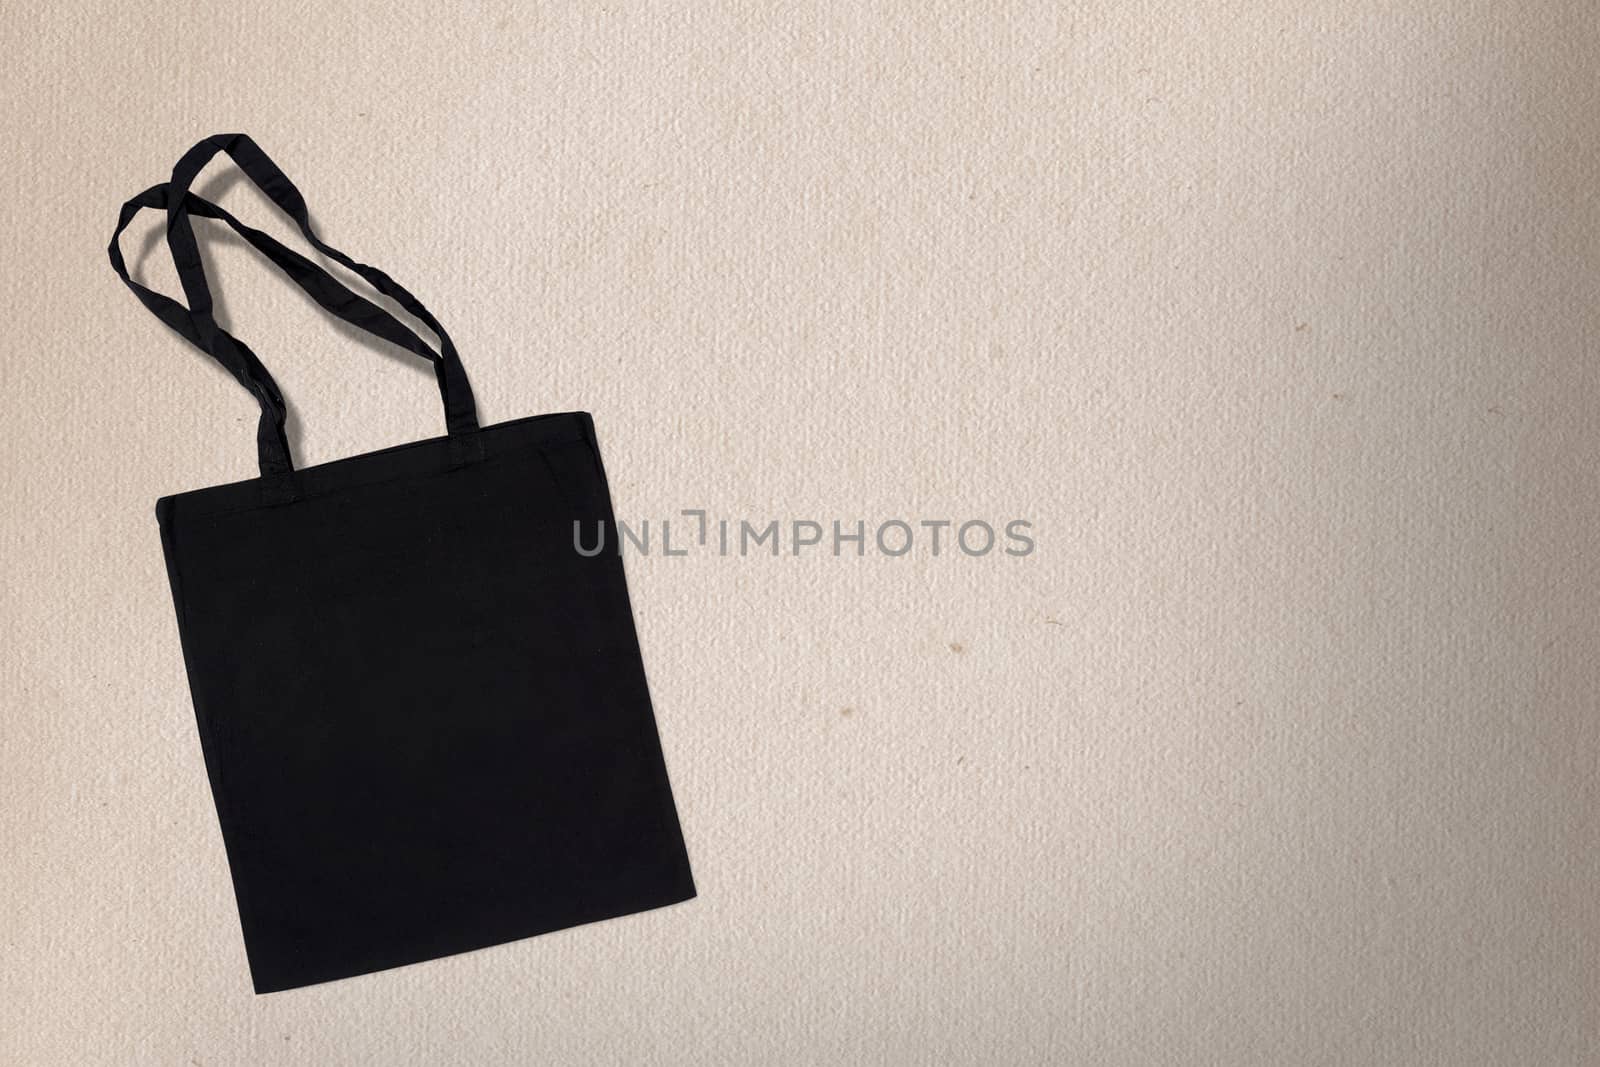 black cotton bag for shopping on a light background by boys1983@mail.ru